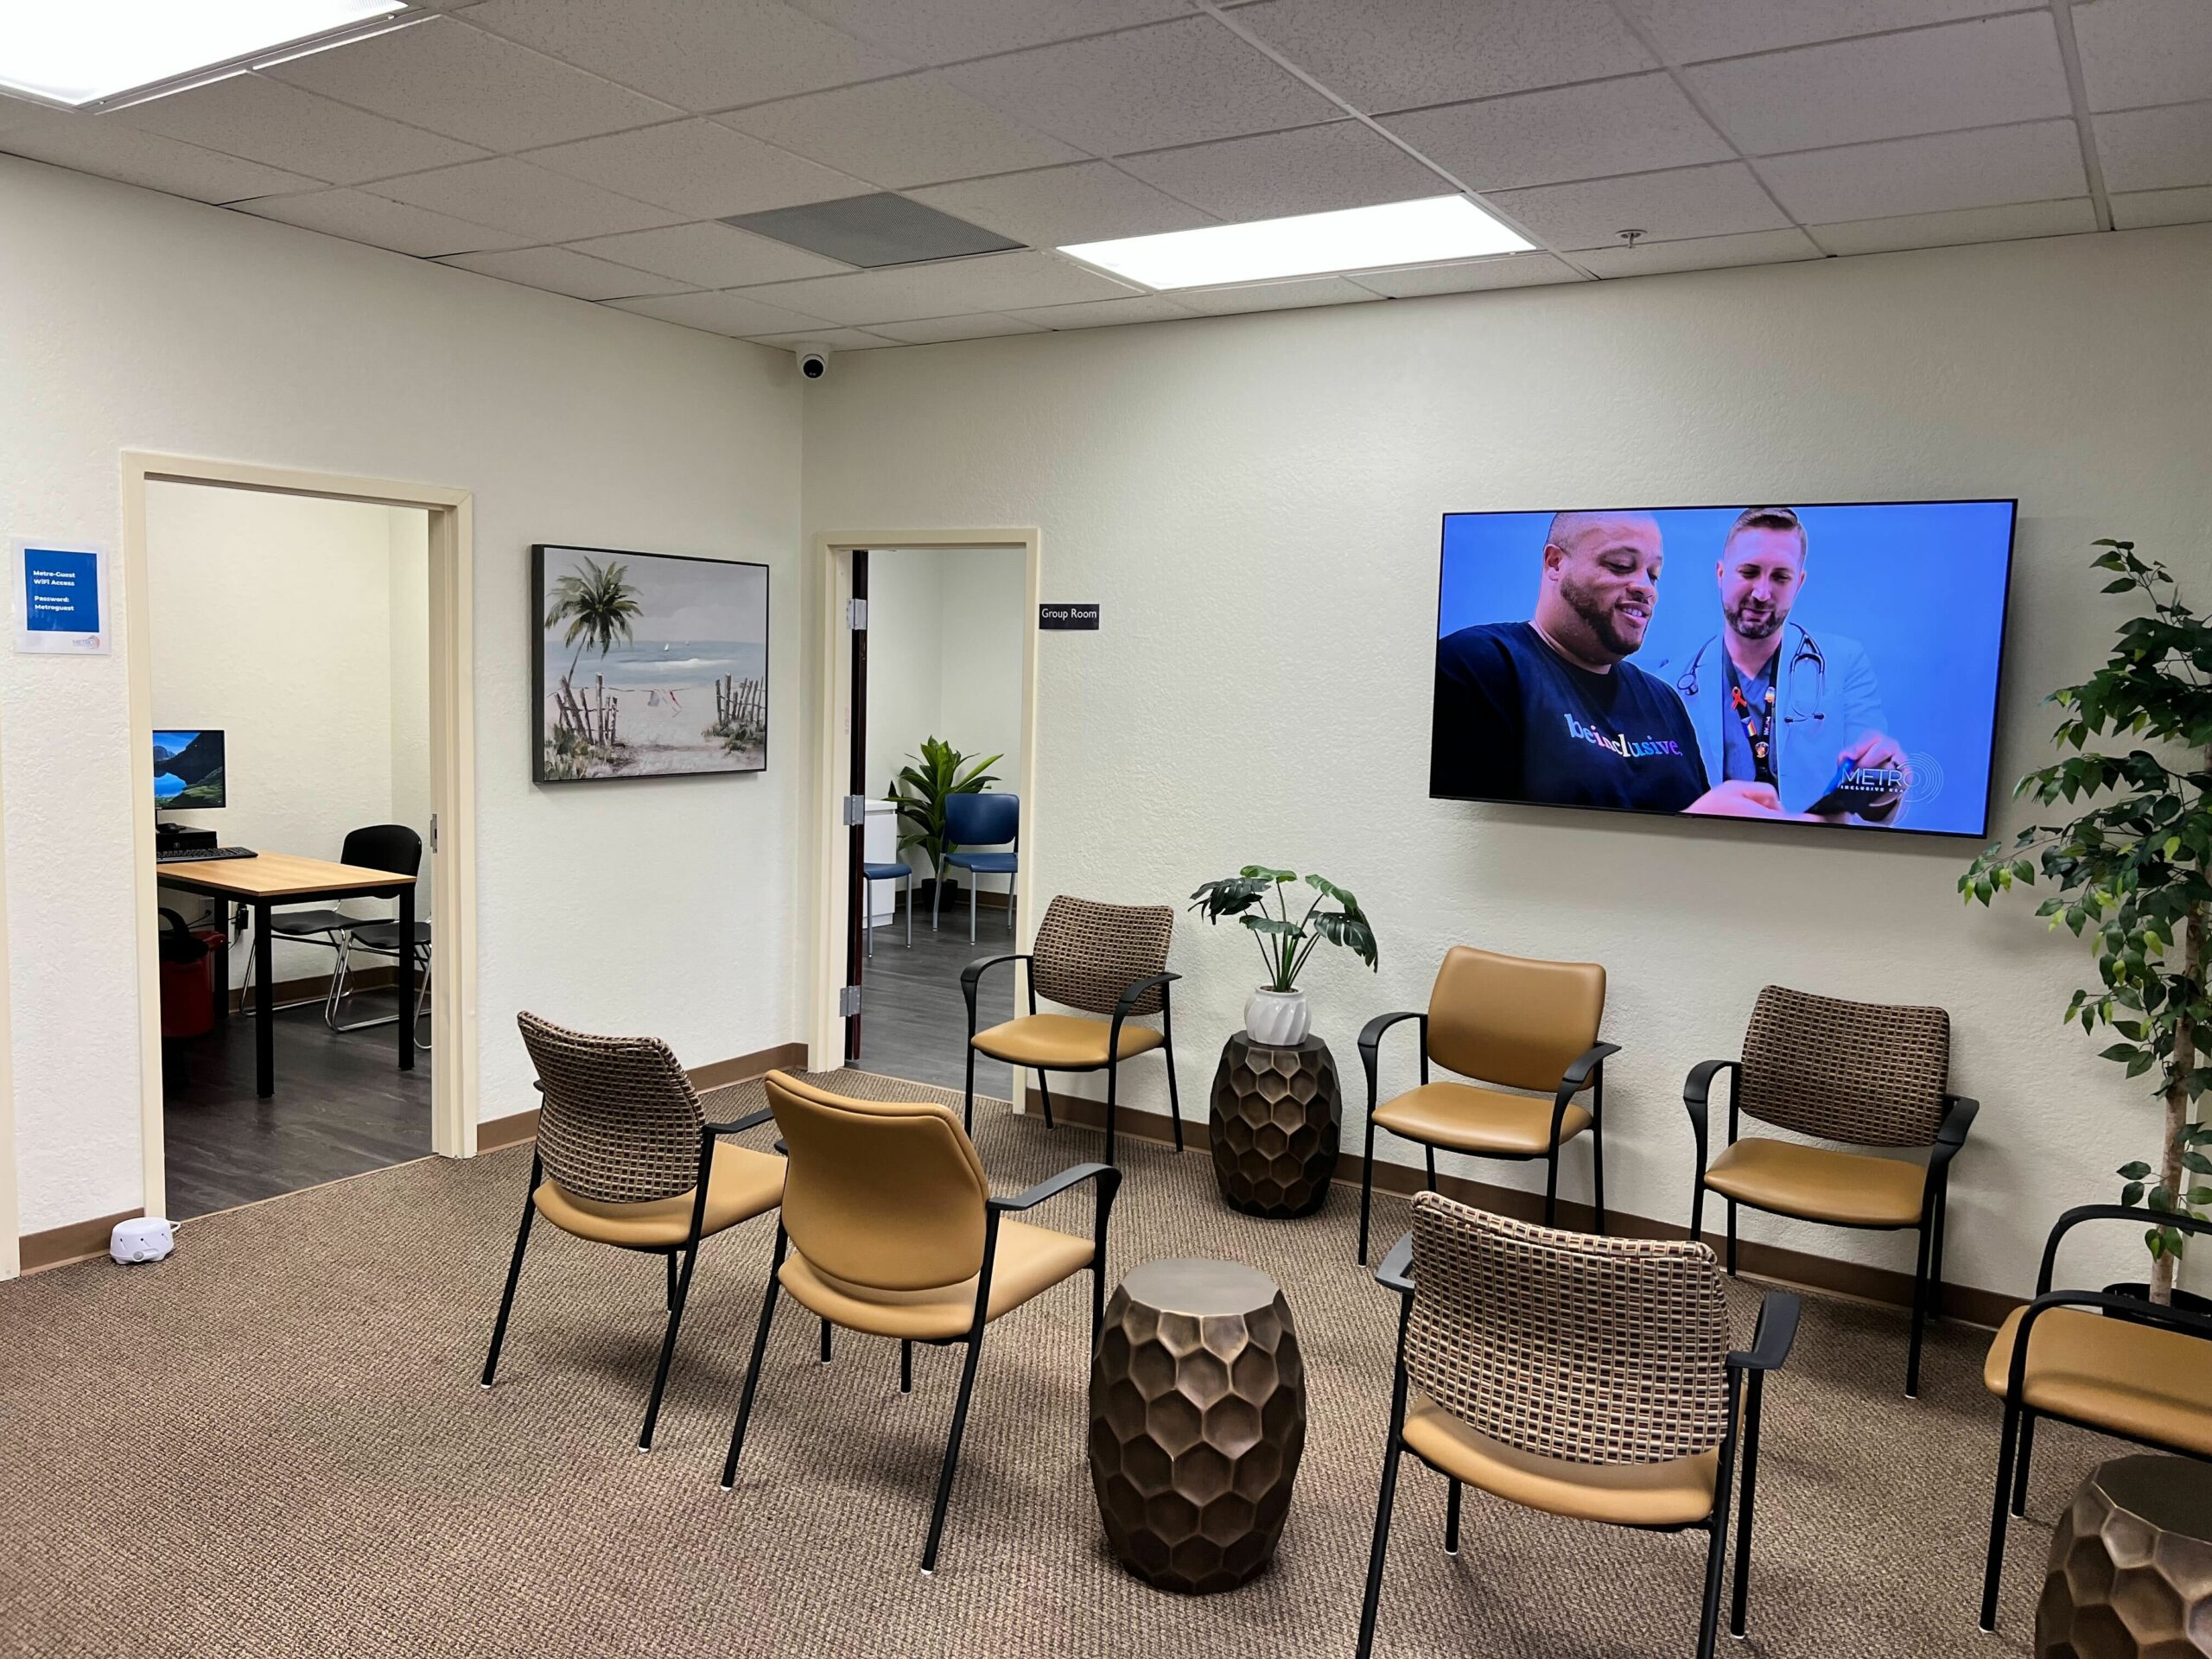 A view of a modern and inviting clinic waiting room with comfortable chairs arranged neatly, a large TV screen showing healthcare content, tropical-themed wall art, and potted plants adding a touch of greenery. The room has a calm and professional atmosphere.